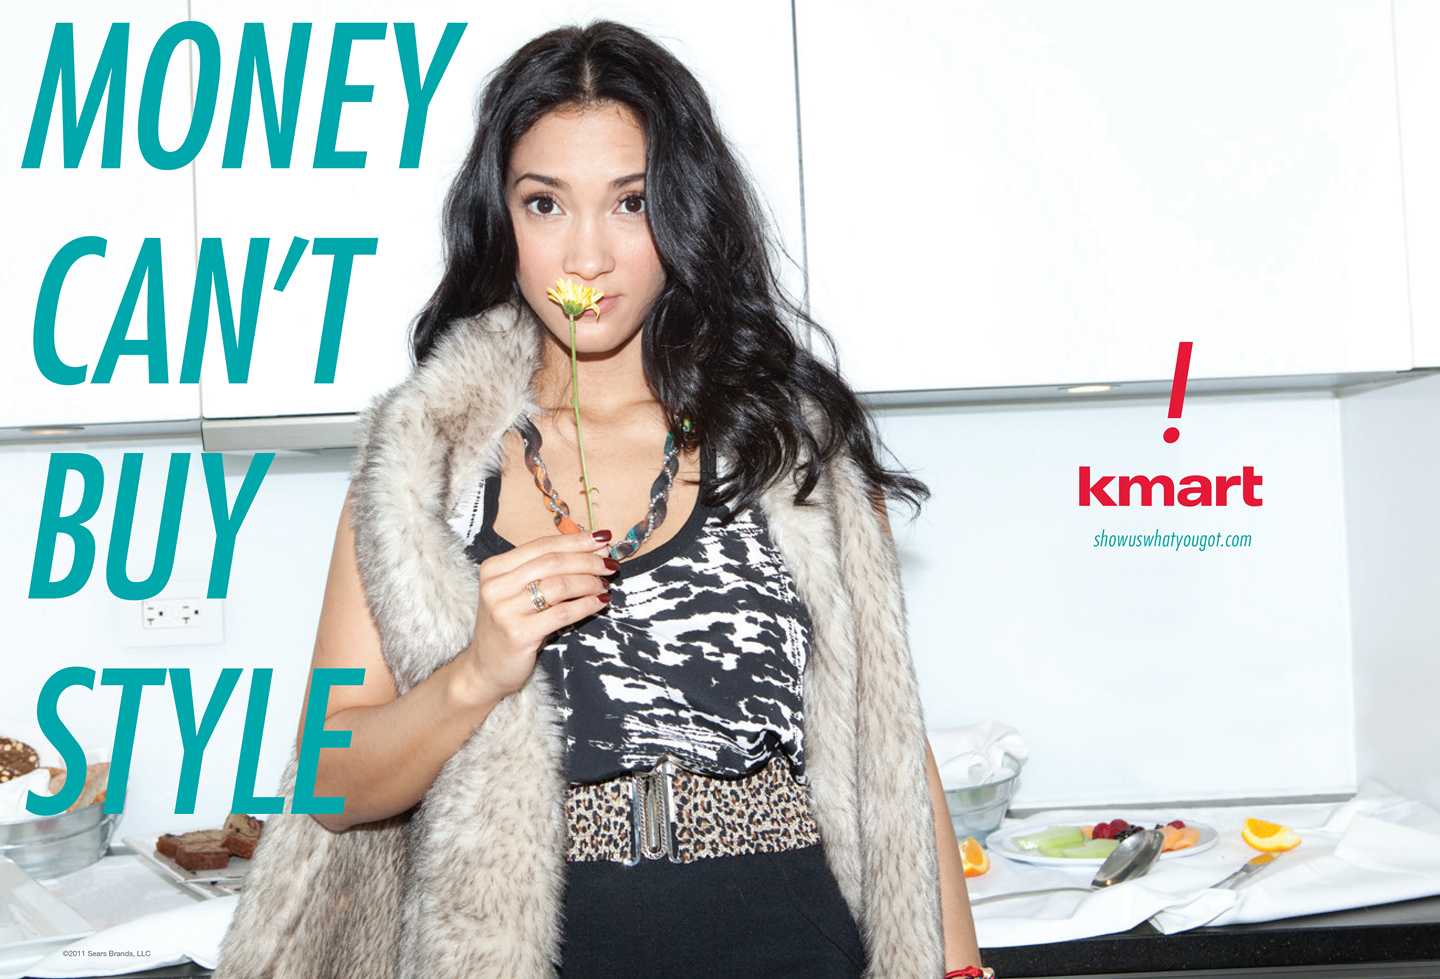 Kmart, Money Can't Buy Style '11, spread ad